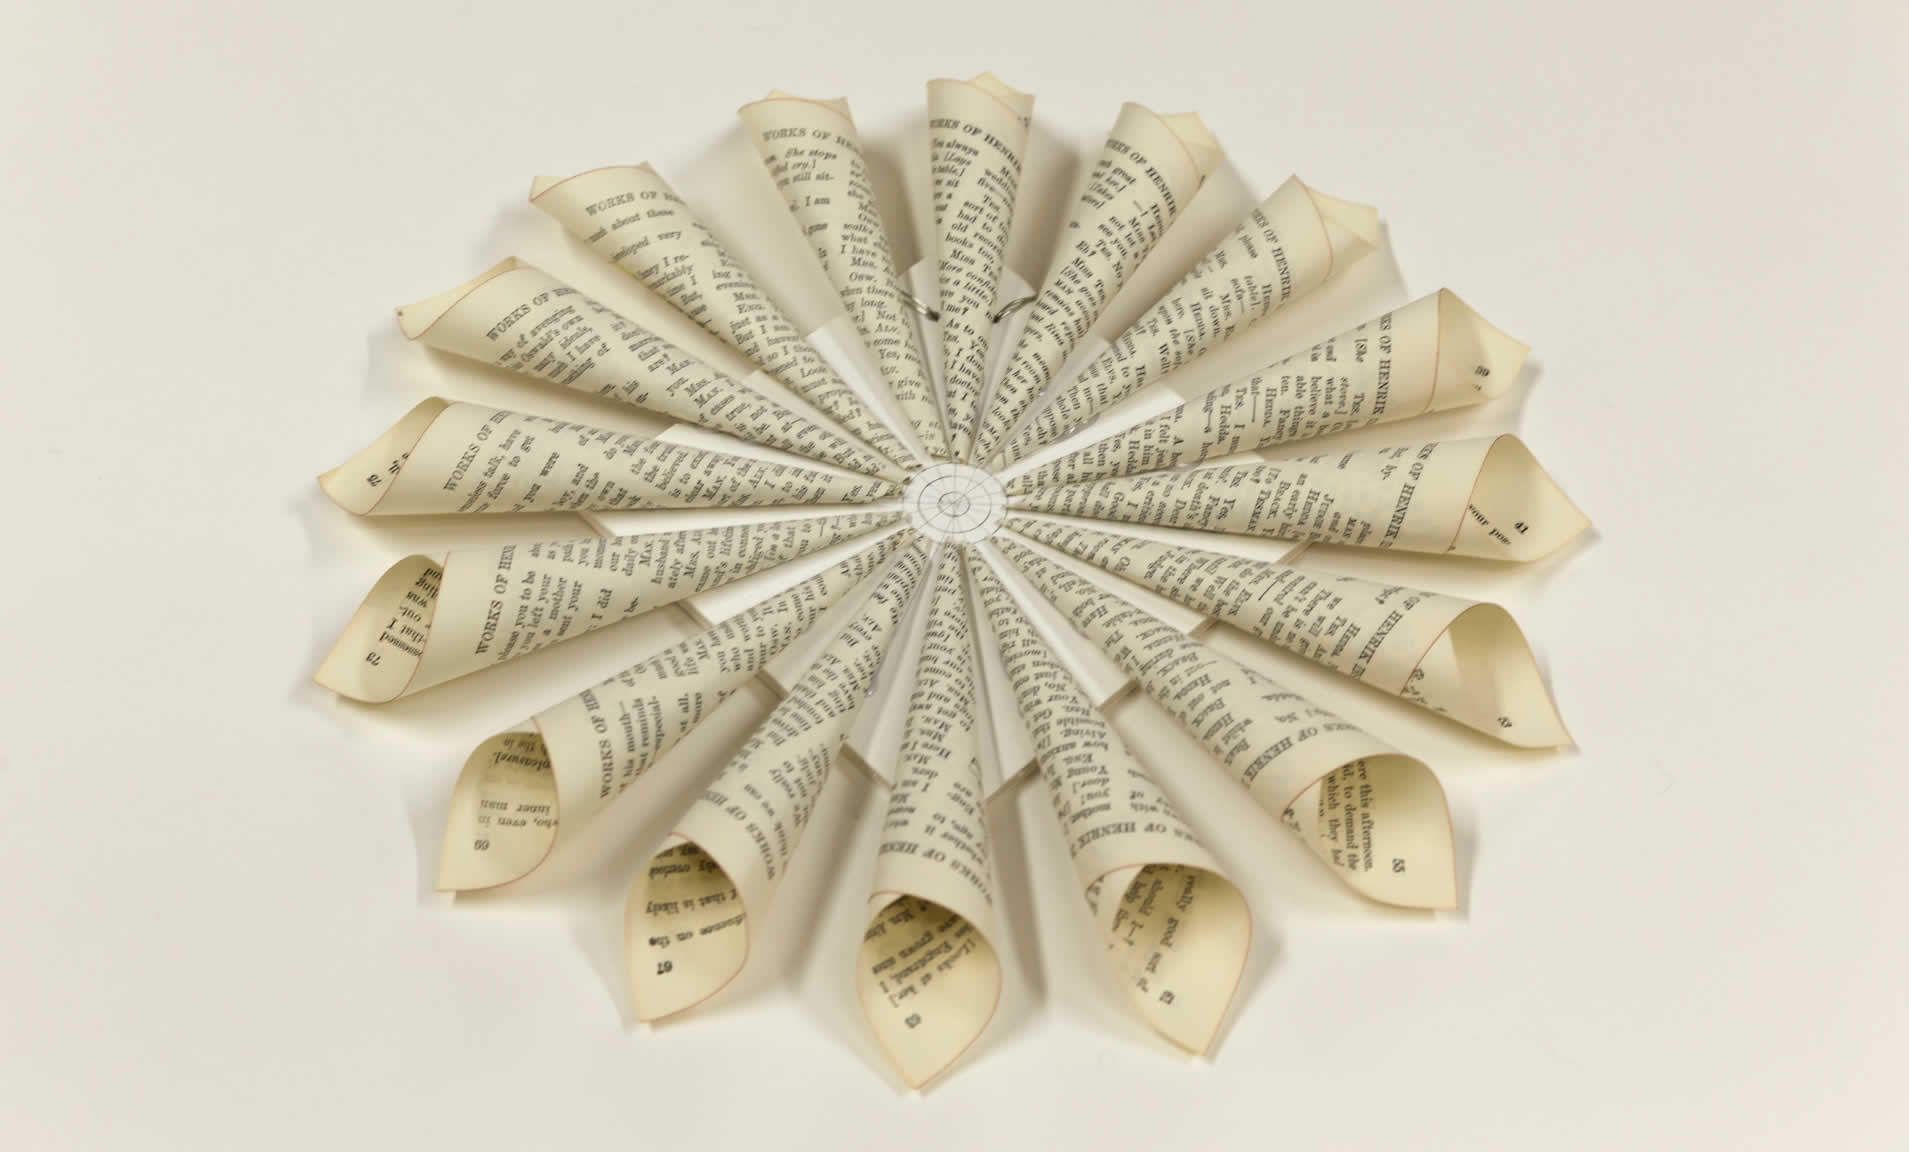 Turn an old book into a book page wreath